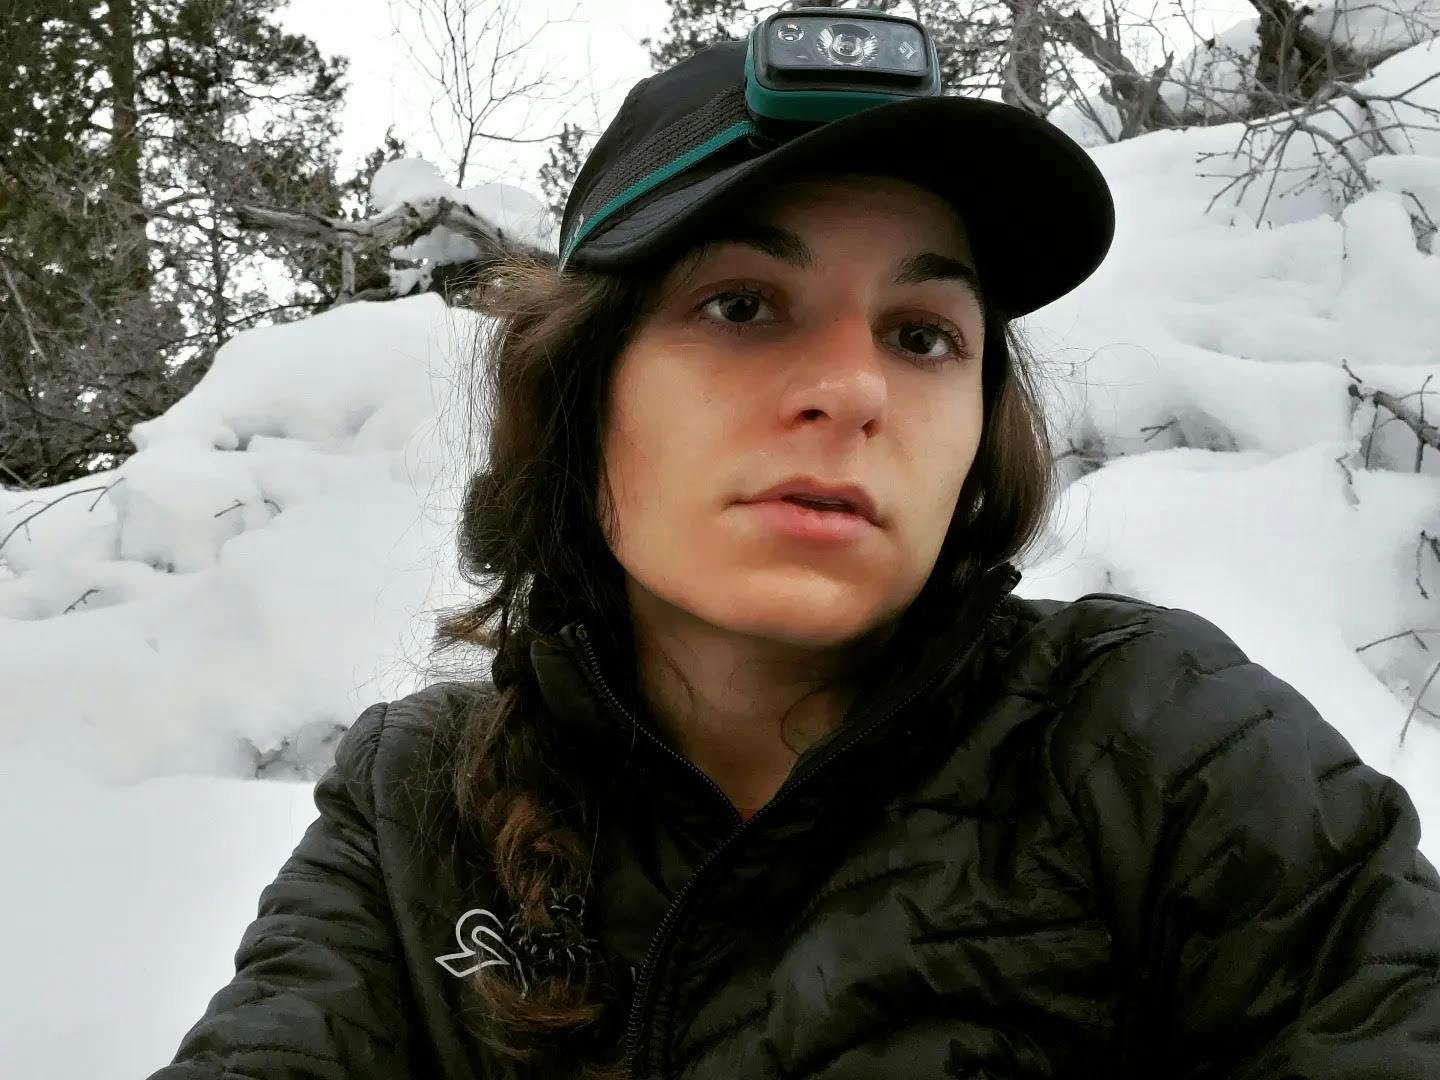 A selfie of a dazed looking hiker wearing a headlamp and hat. She is sitting in a snowy area.